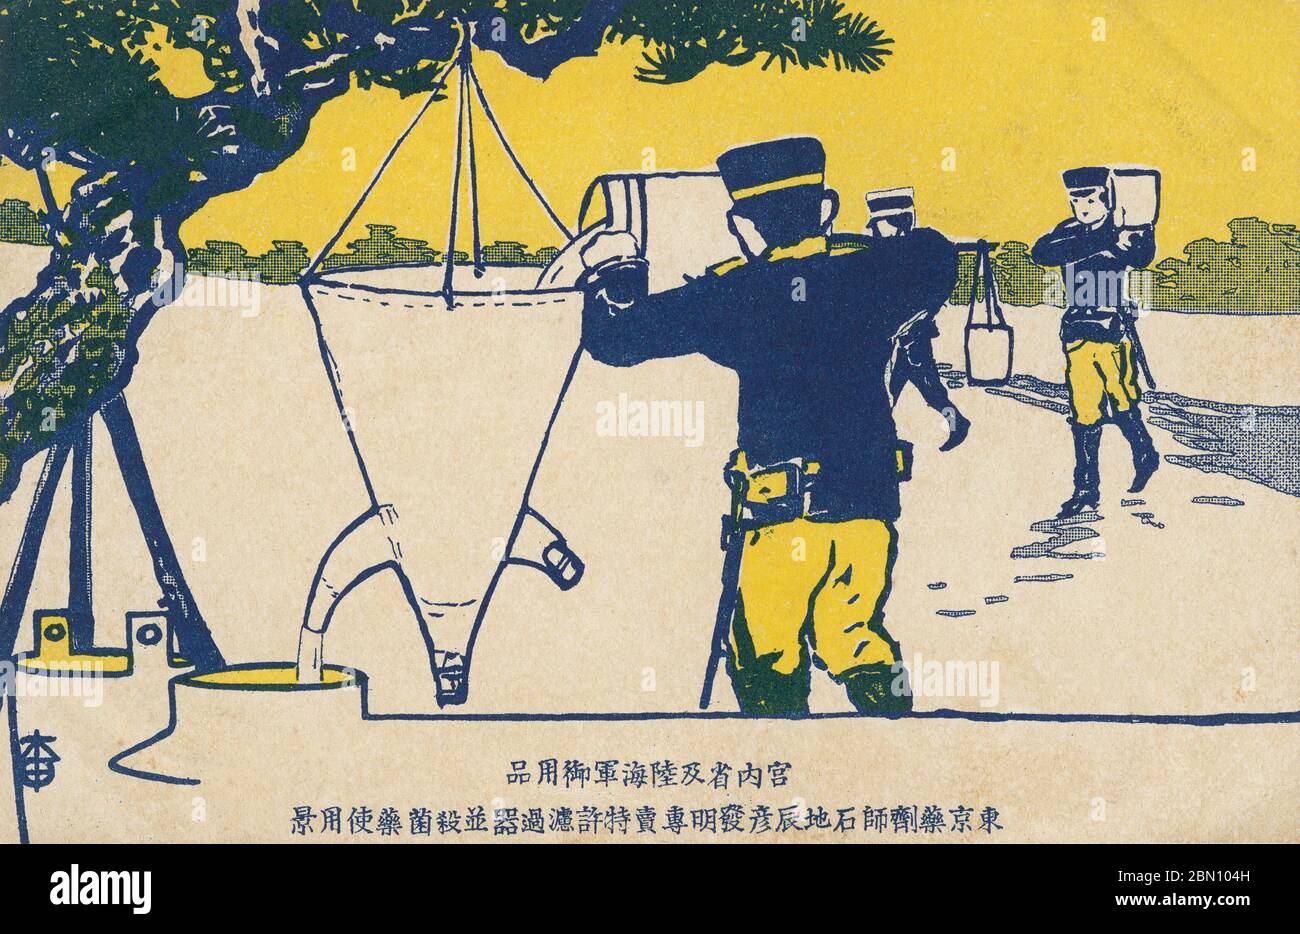 [ 1900s Japan - Army Water Filter ] —   Promotional postcard featuring an illustration of a soldier of the Imperial Japanese Army using a water filter invented by Japanese inventor Tatsuhiko Ishichi (石地辰彦).  20th century vintage postcard. Stock Photo